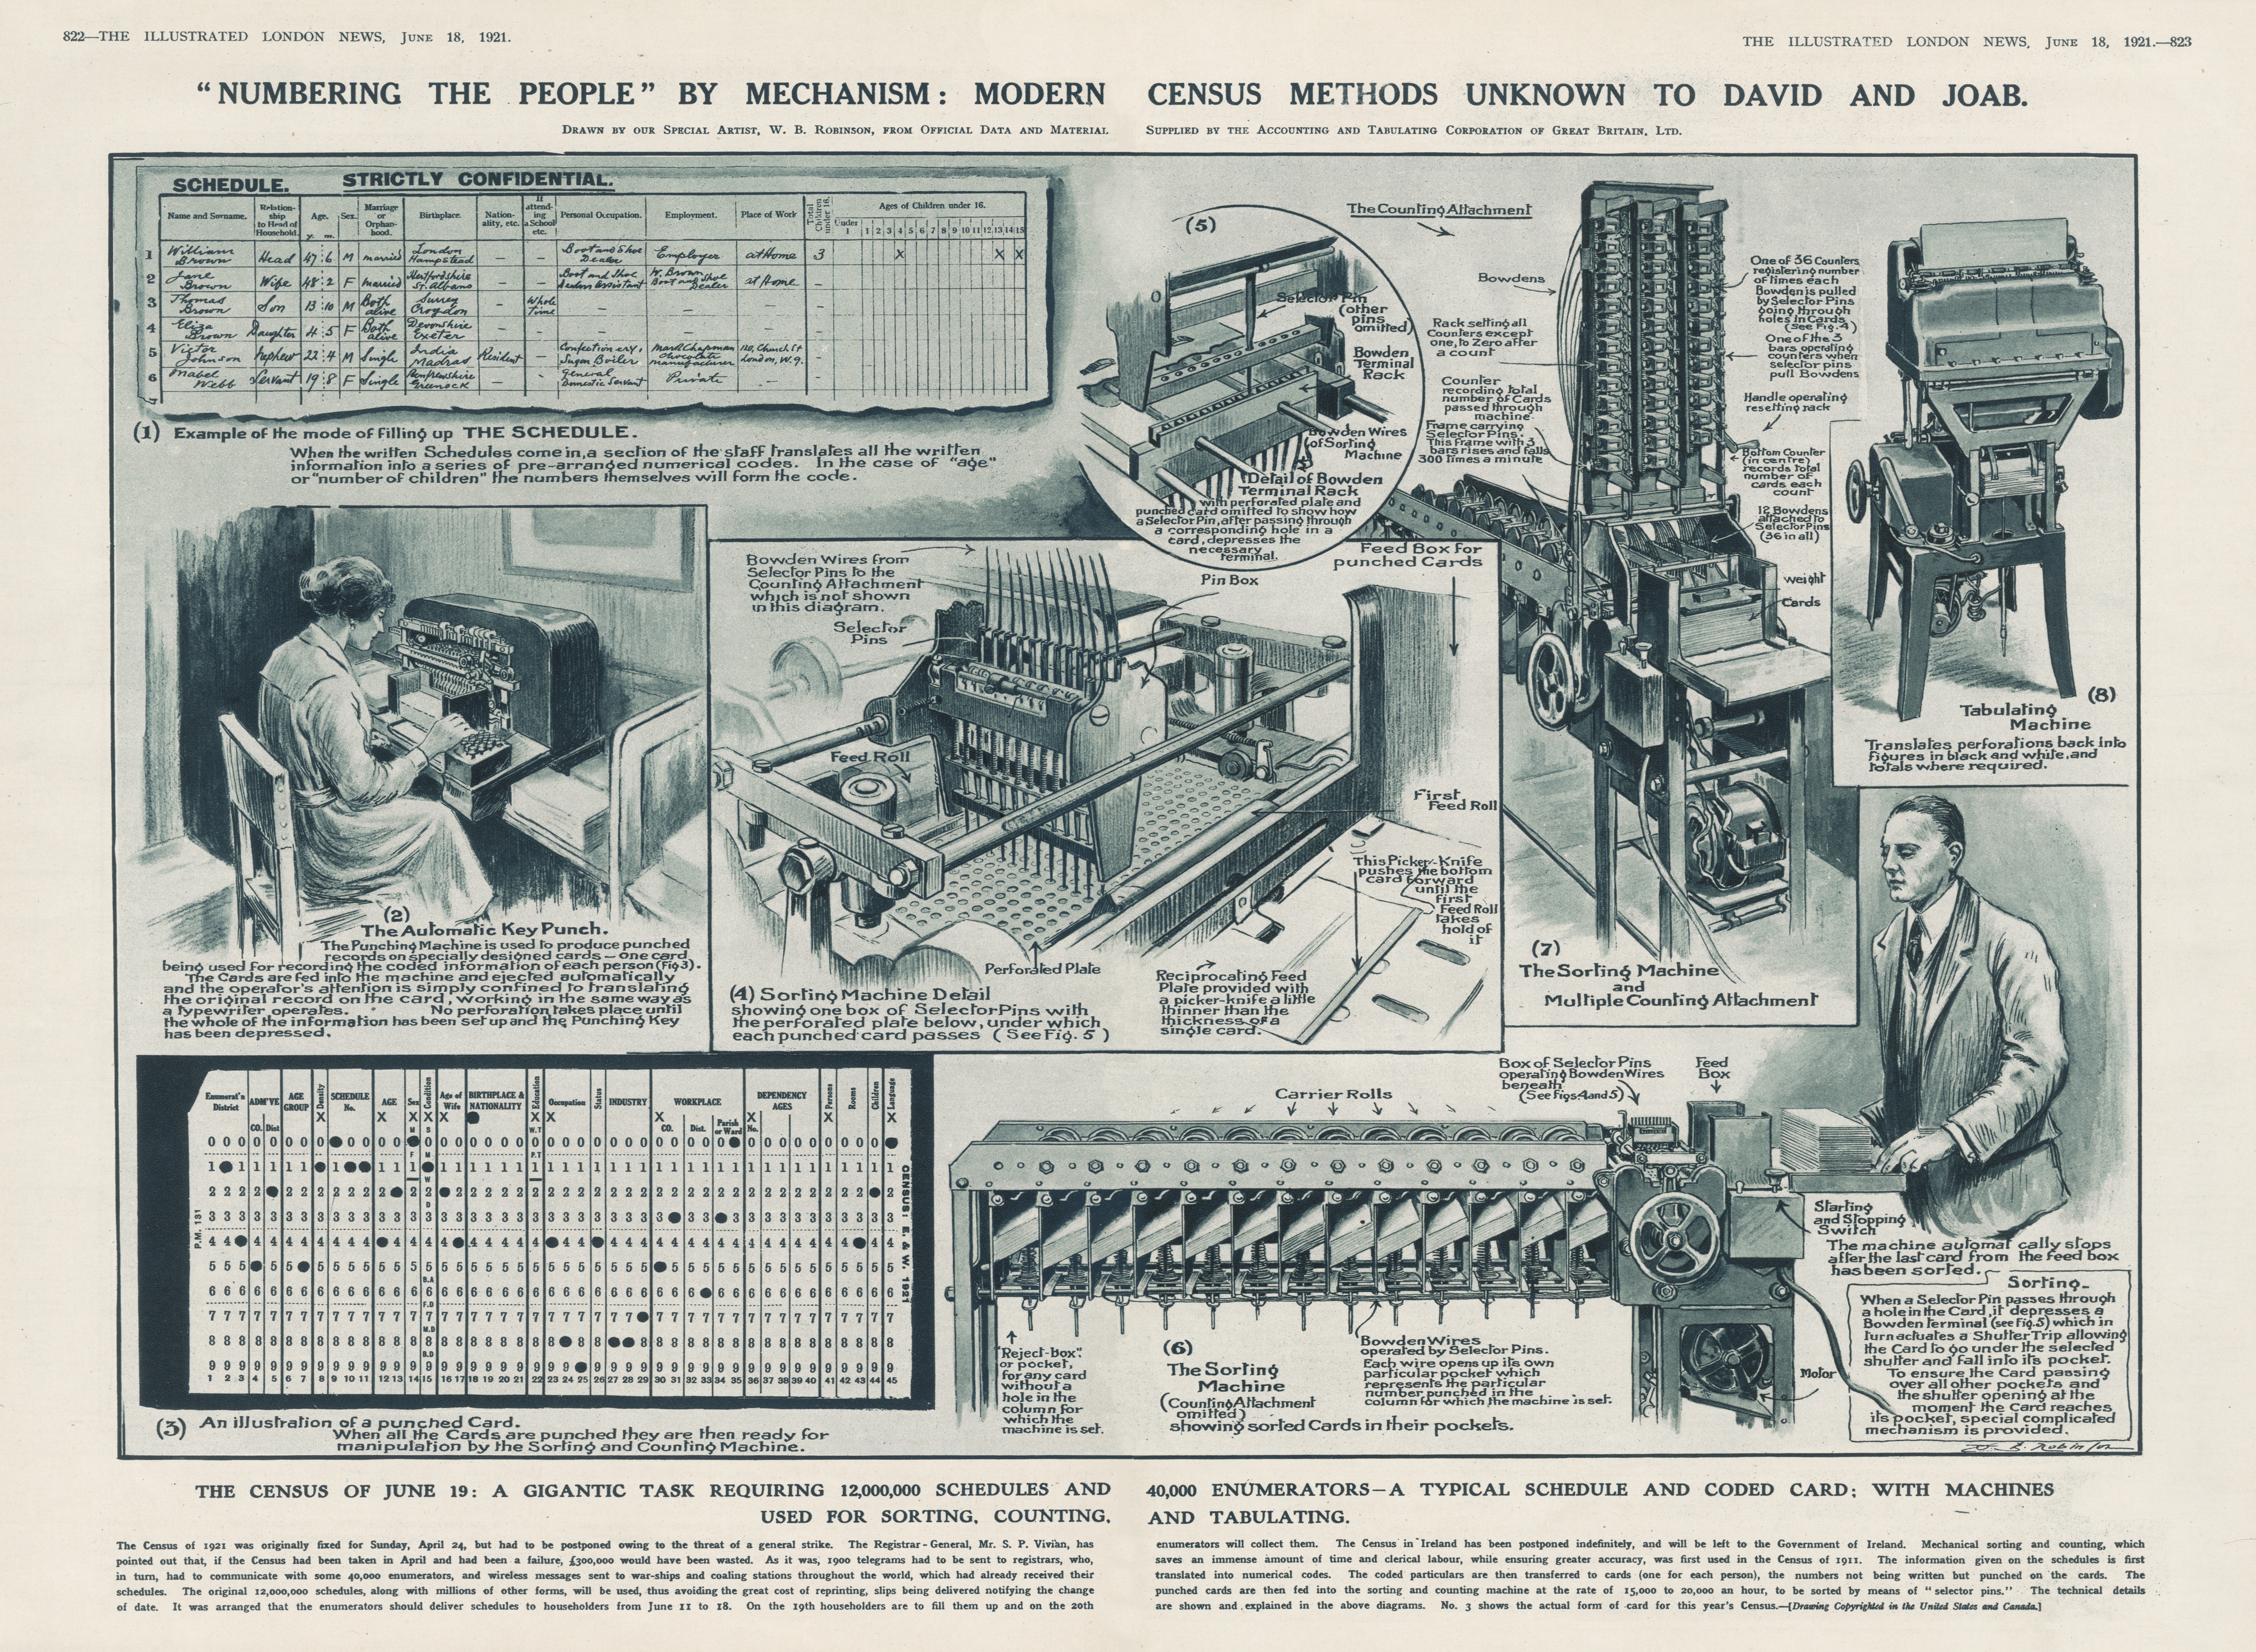 Newscutting featuring an illustration of the counting machines used in the 1921 census